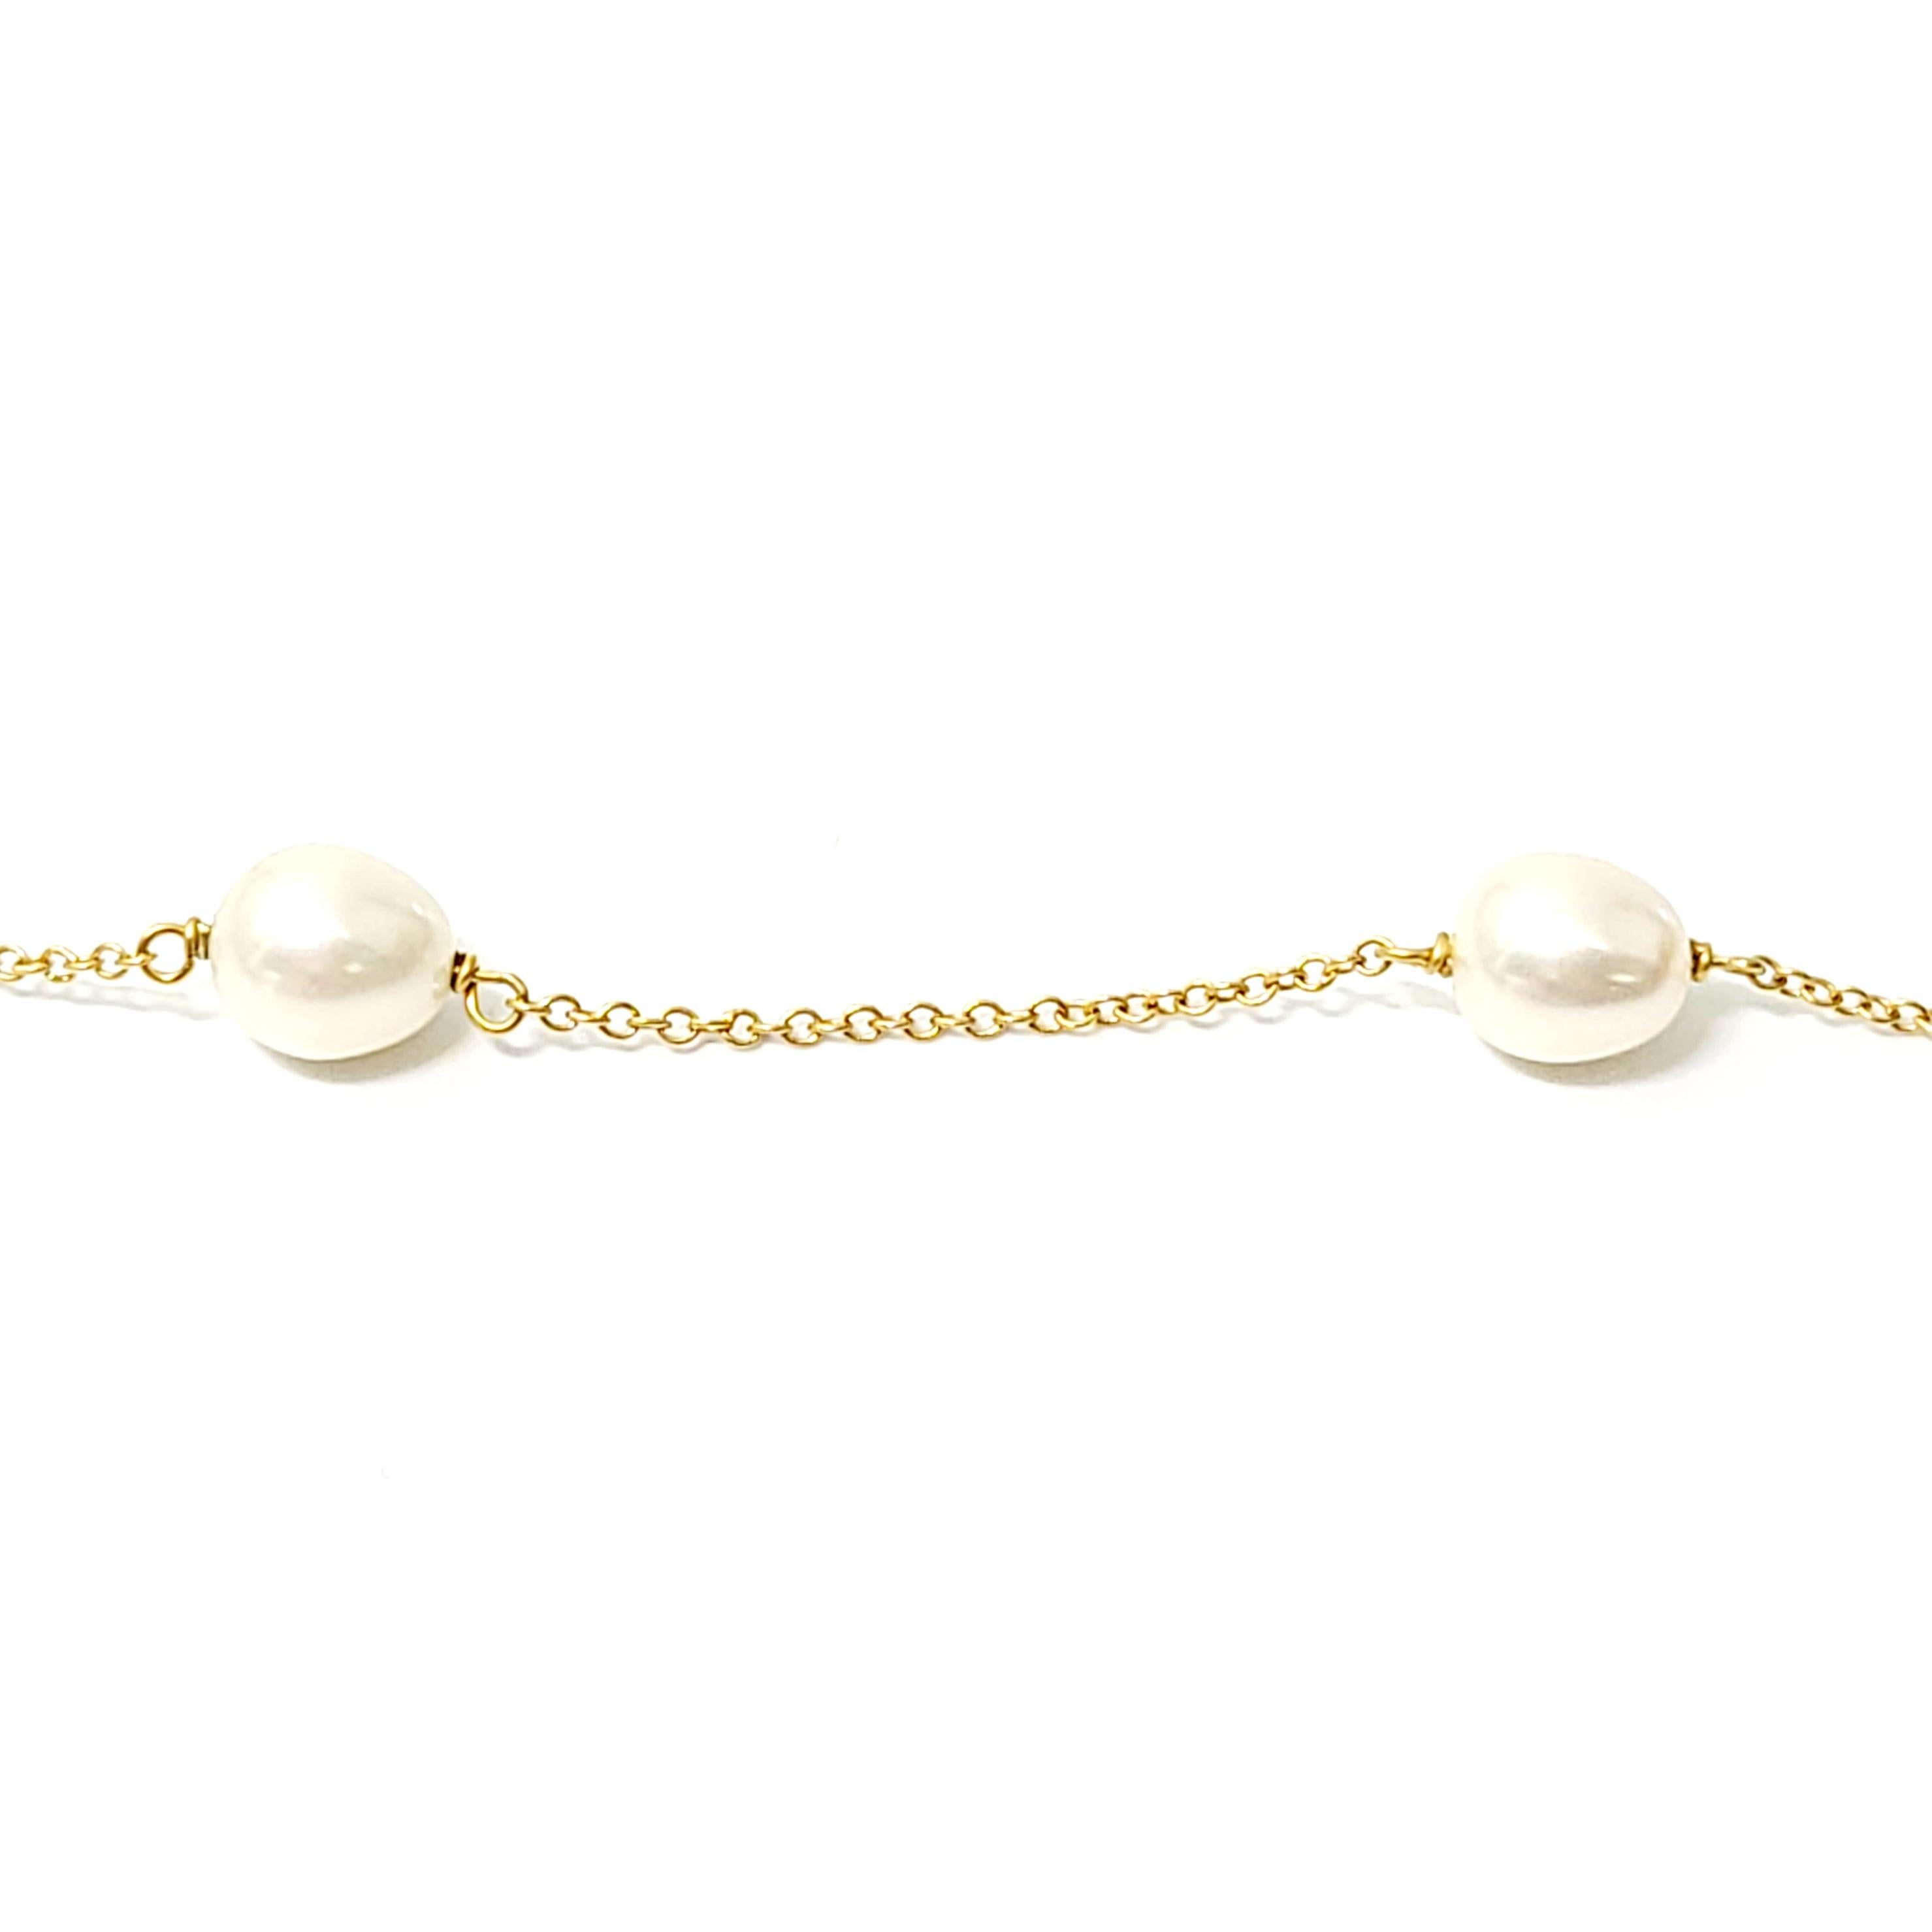 tiffany pearls by the yard bracelet gold